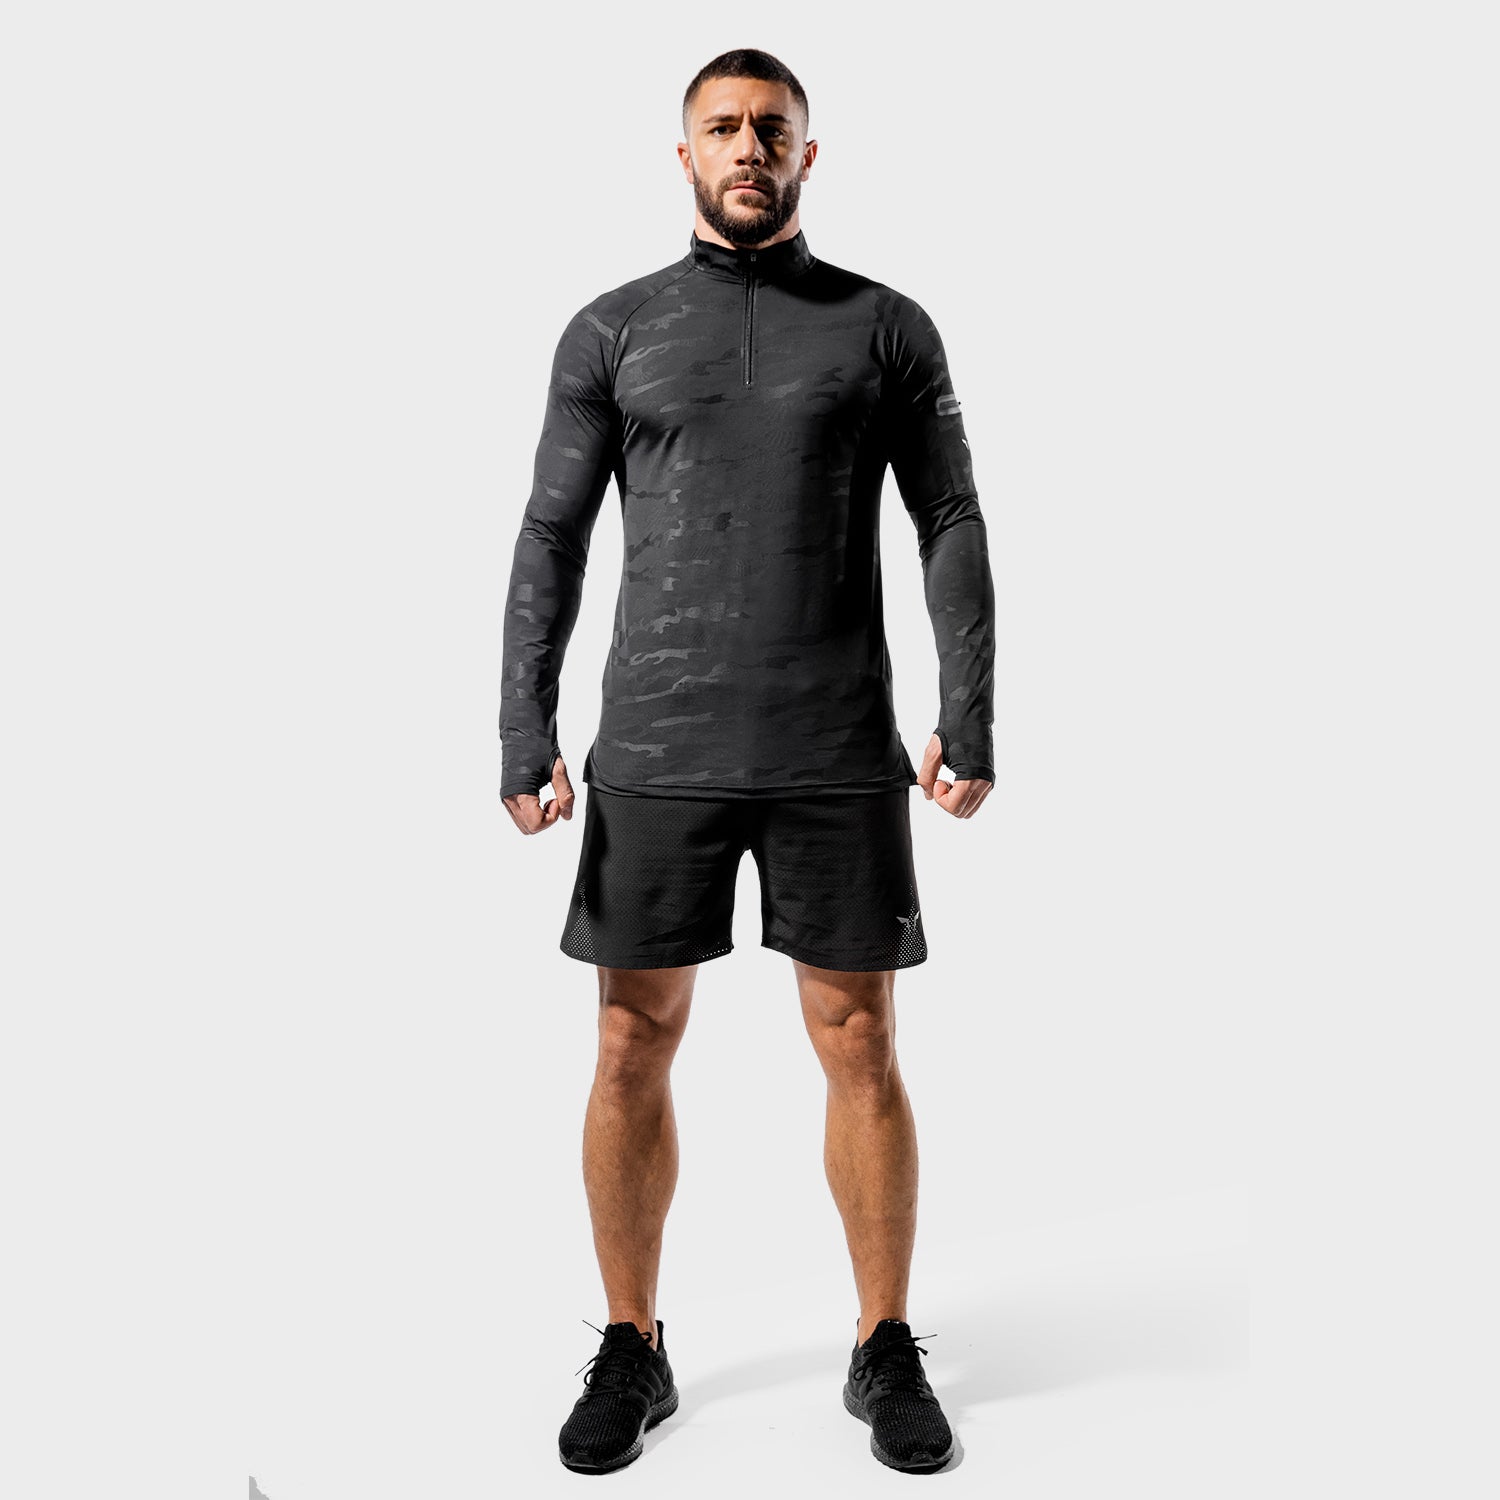 squatwolf-running-tops-for-men-core-running-top-black-camo-long-sleeves-gym-wear